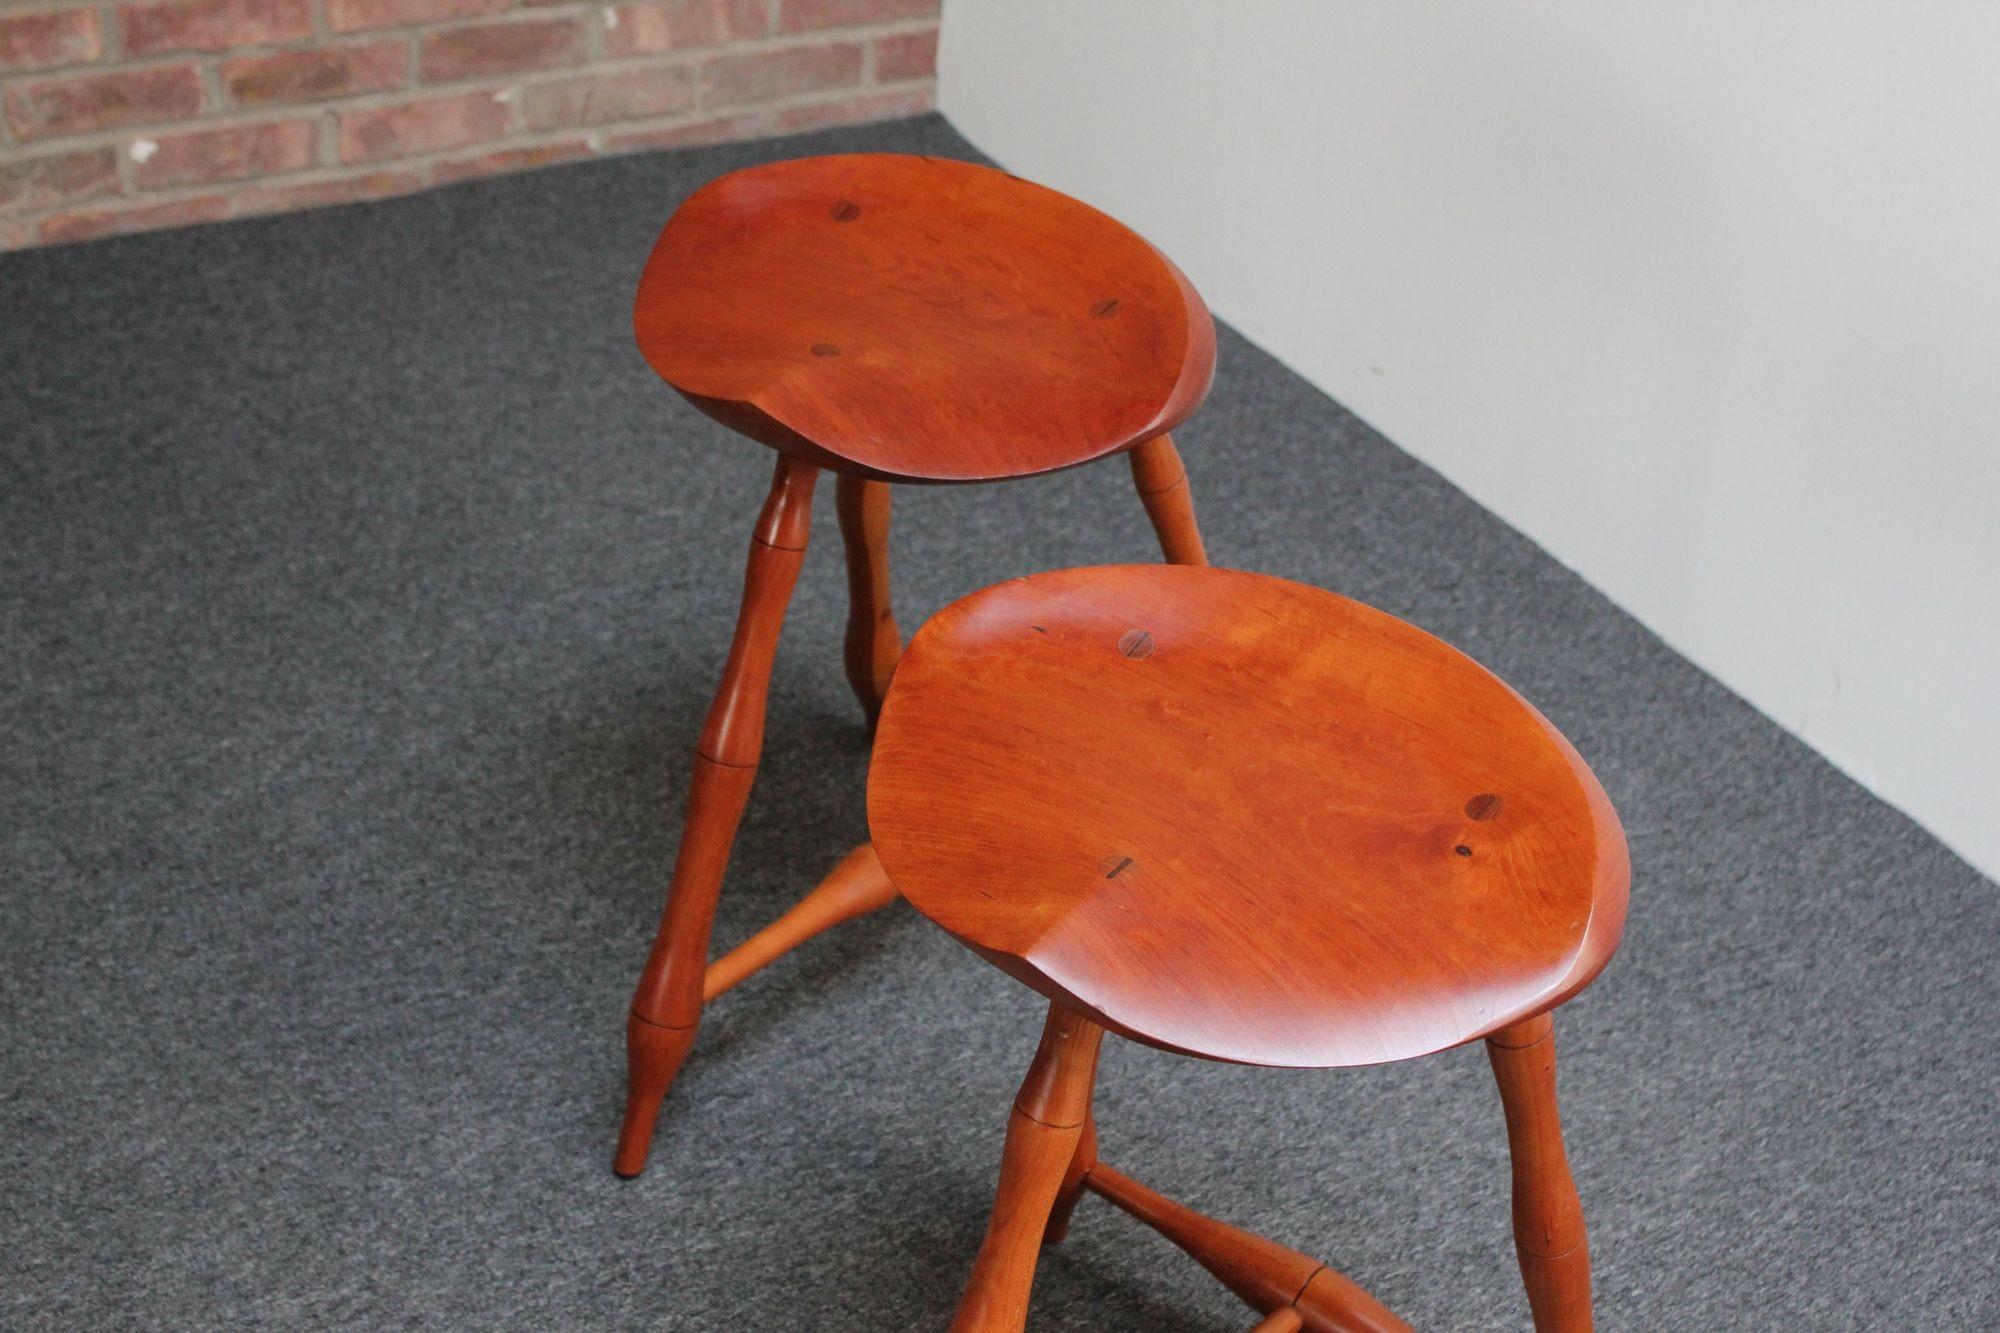 Pair of Vintage Studio Craft Windsor-Style Three Legged Low Stools in Cherrywood For Sale 10